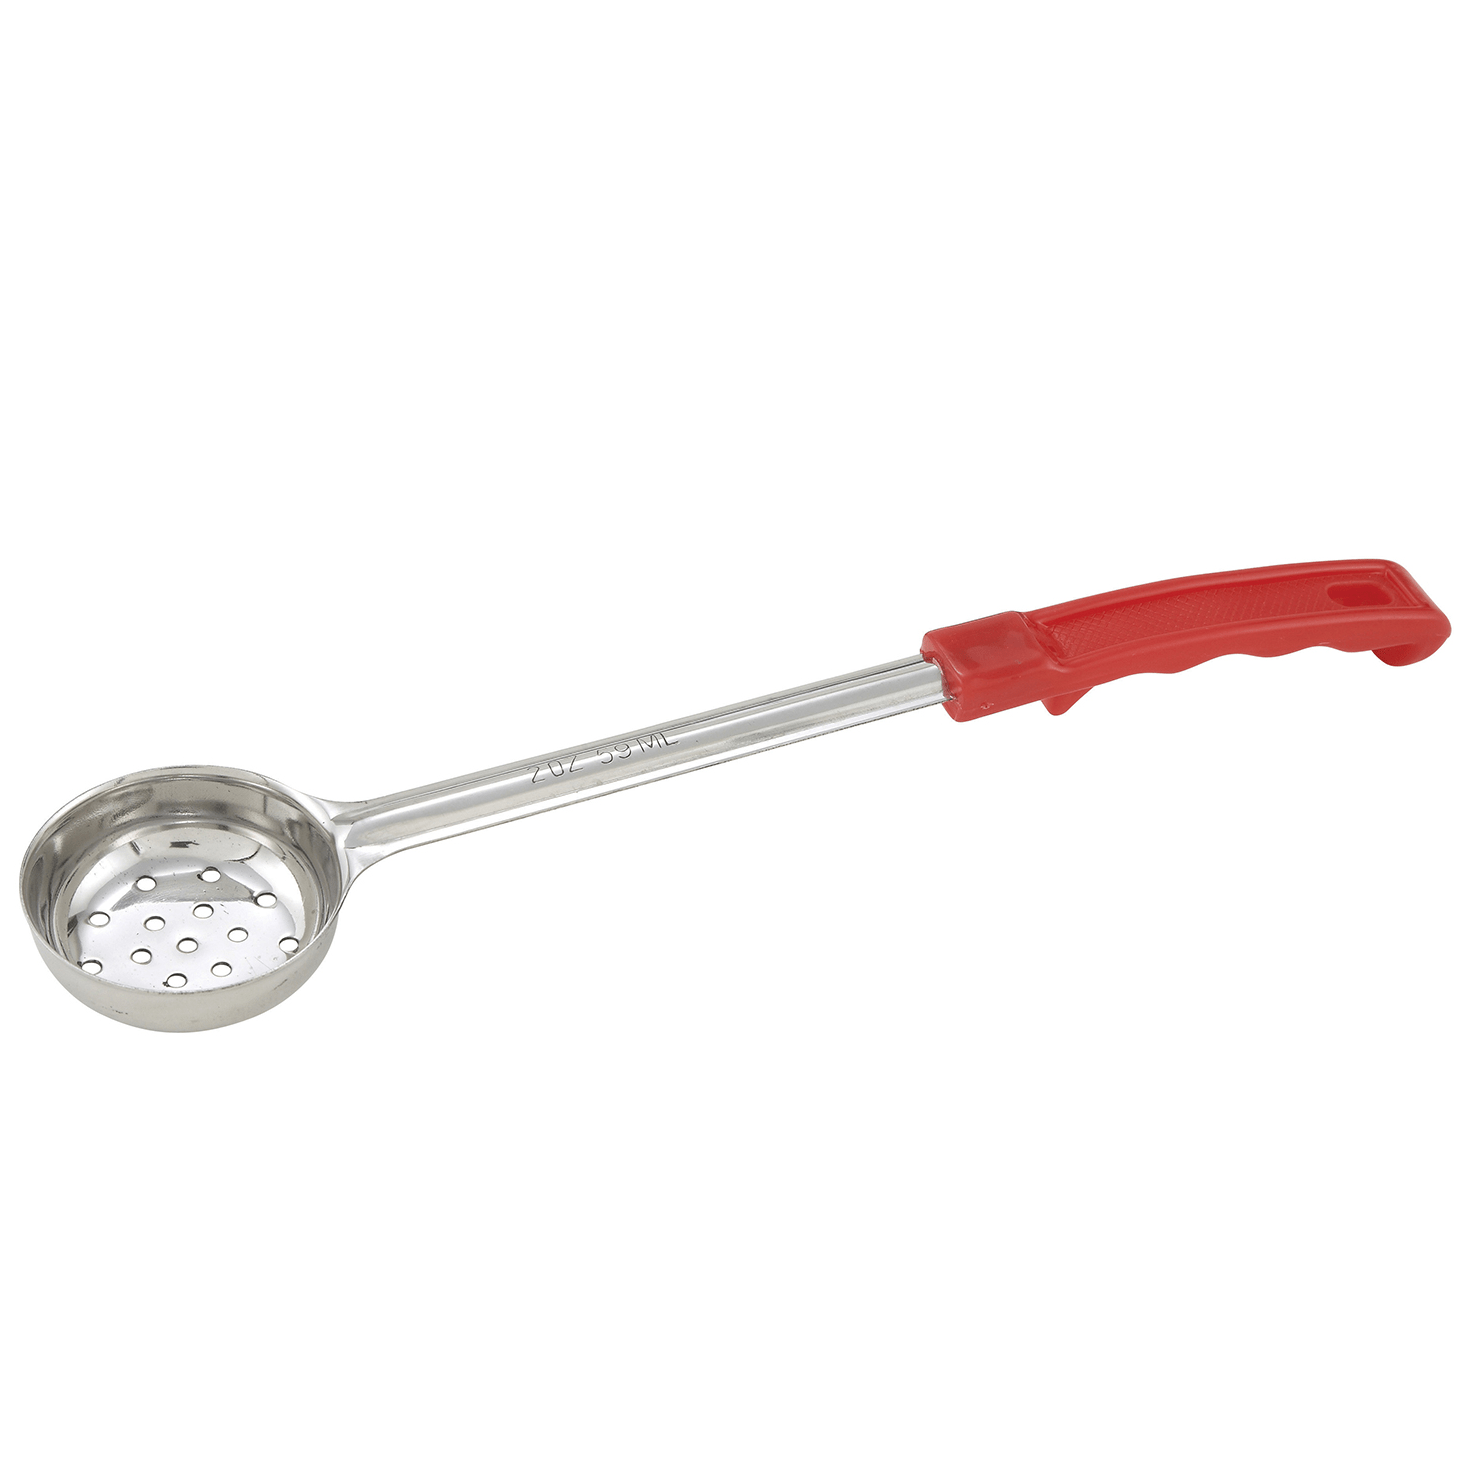 Stainless Steel Portion Scoop - Size 40 – VKP Brands